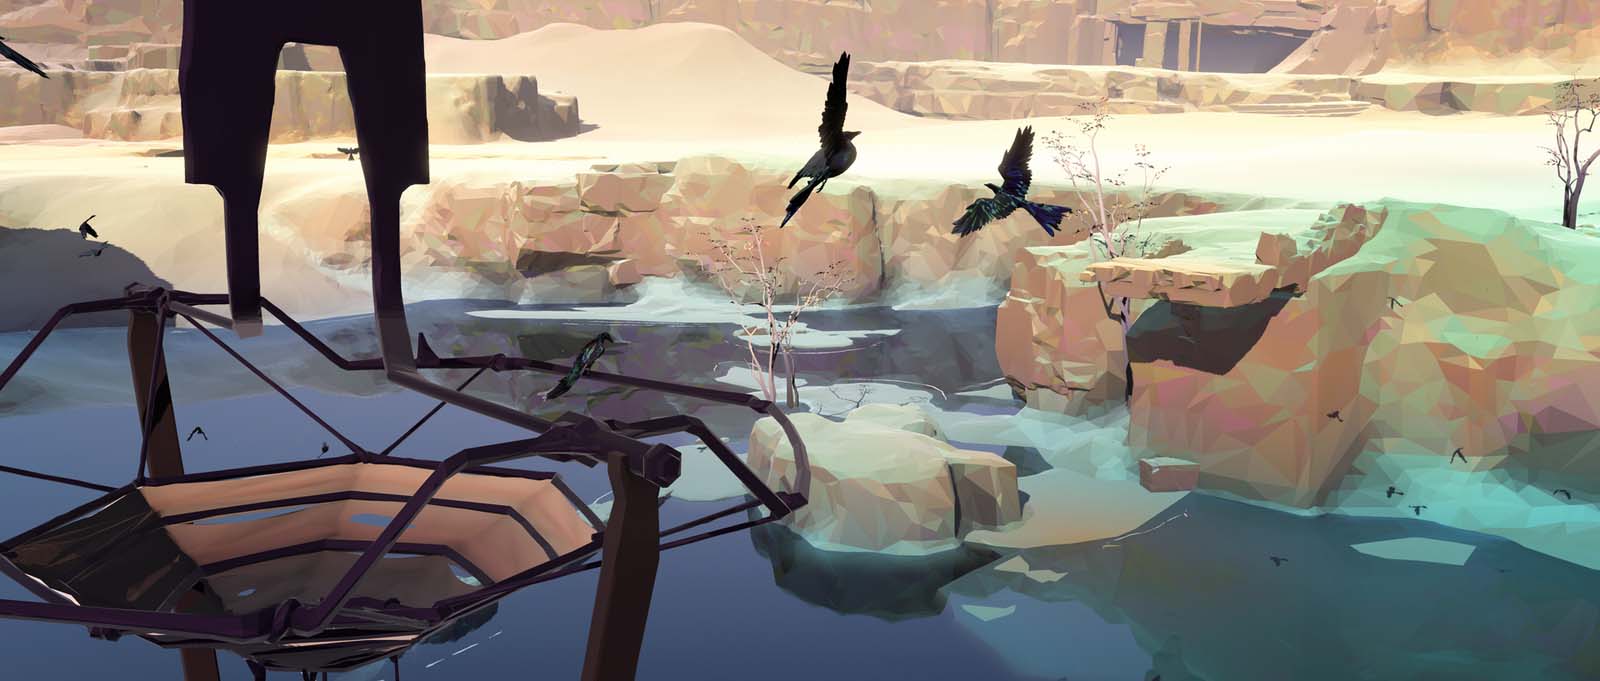 Vane premieres exclusively on PlayStation 4 January 15th